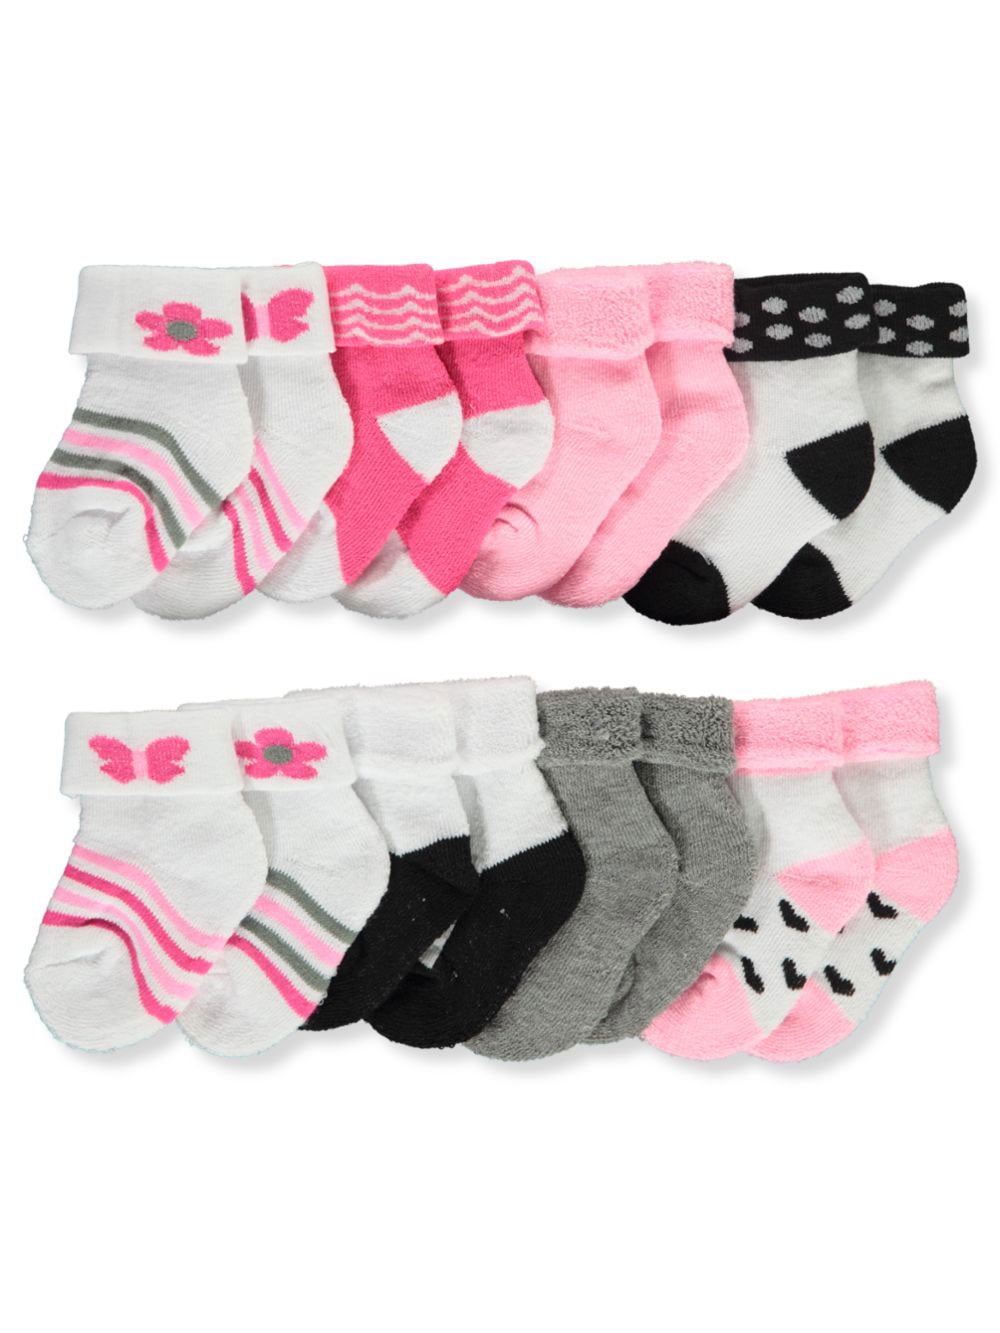 3-PACK TODDLER GIRLS SOLE TRENDS WINTER HEAT CONTROL SOCKS NWT USA SOCK SIZE 4-6 